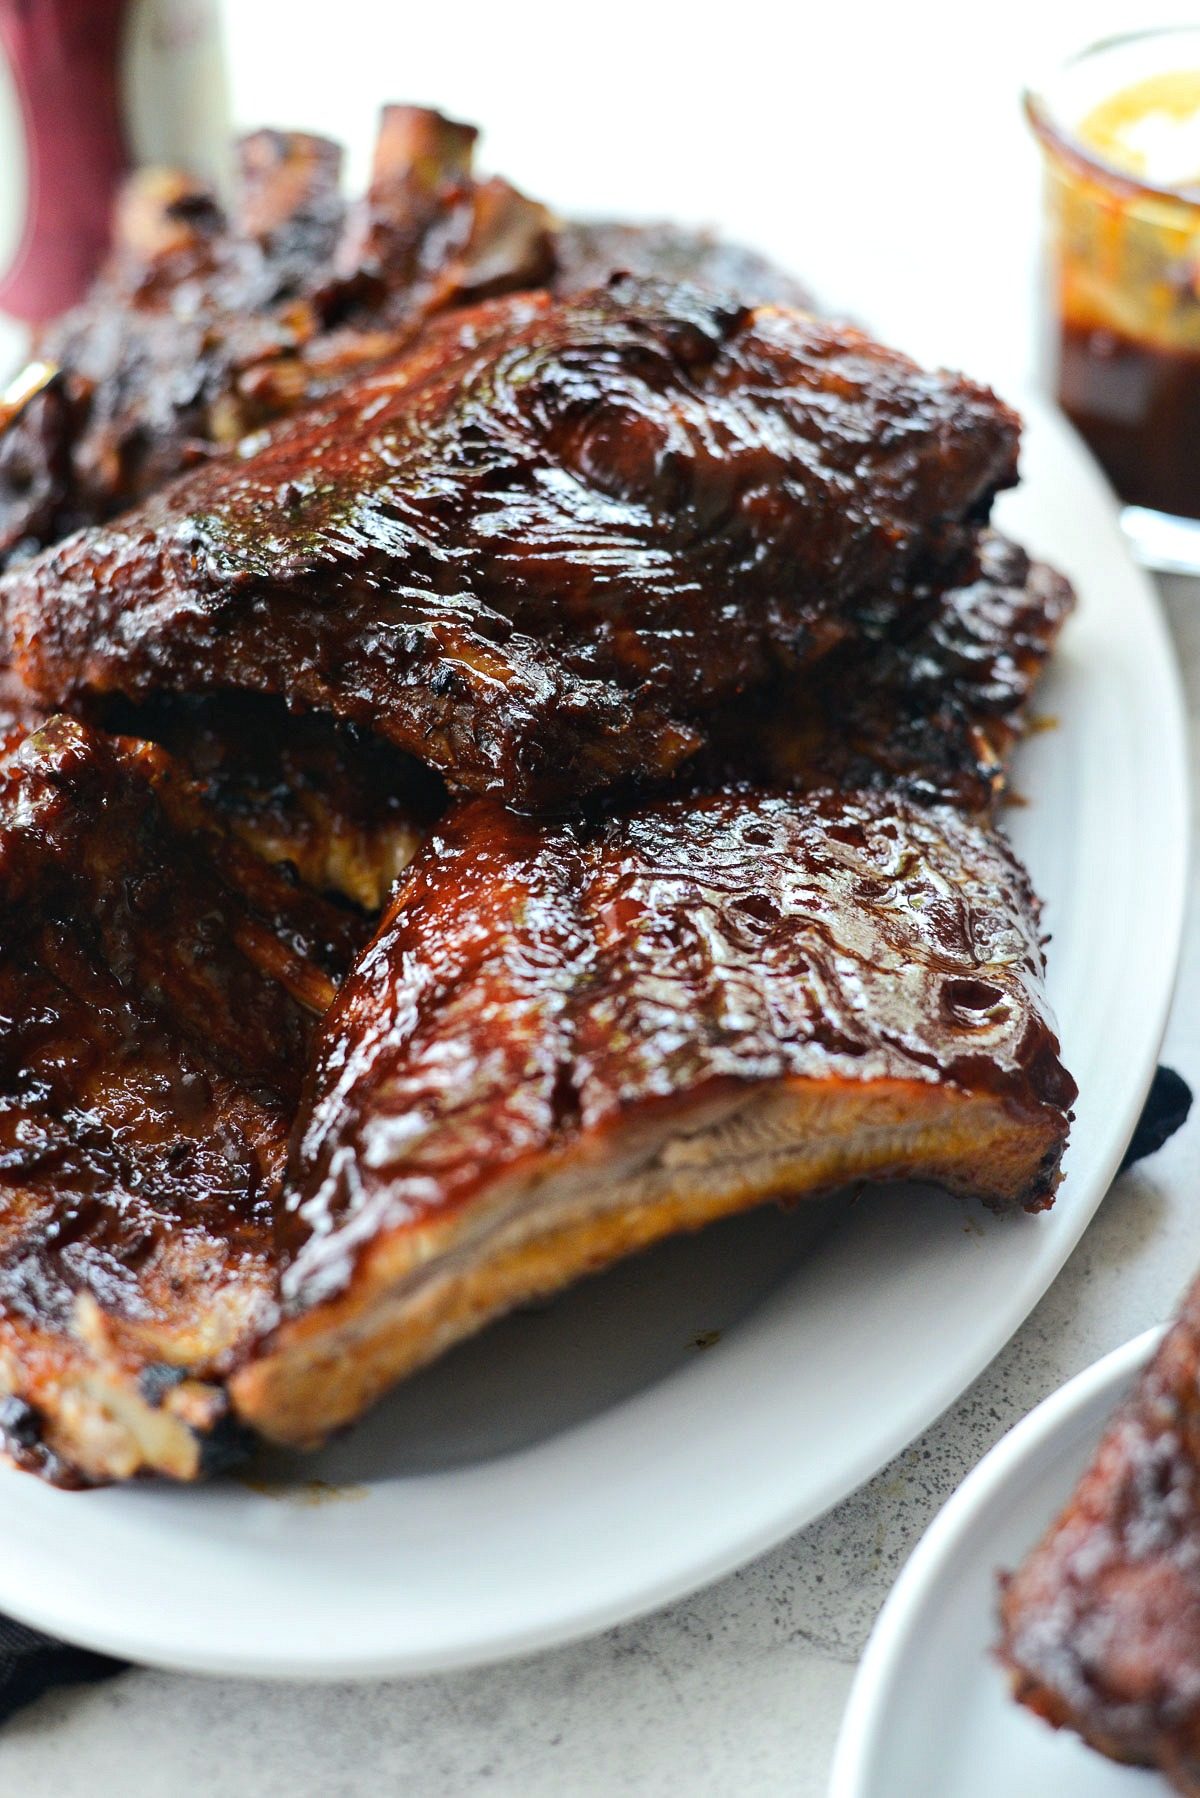 Easy BBQ Baby Back Ribs l SimplyScratch.com #easyrecipe #griling #BBQ #babybackribs #ribs #ovenbaked #grilled #homemade #sauce 